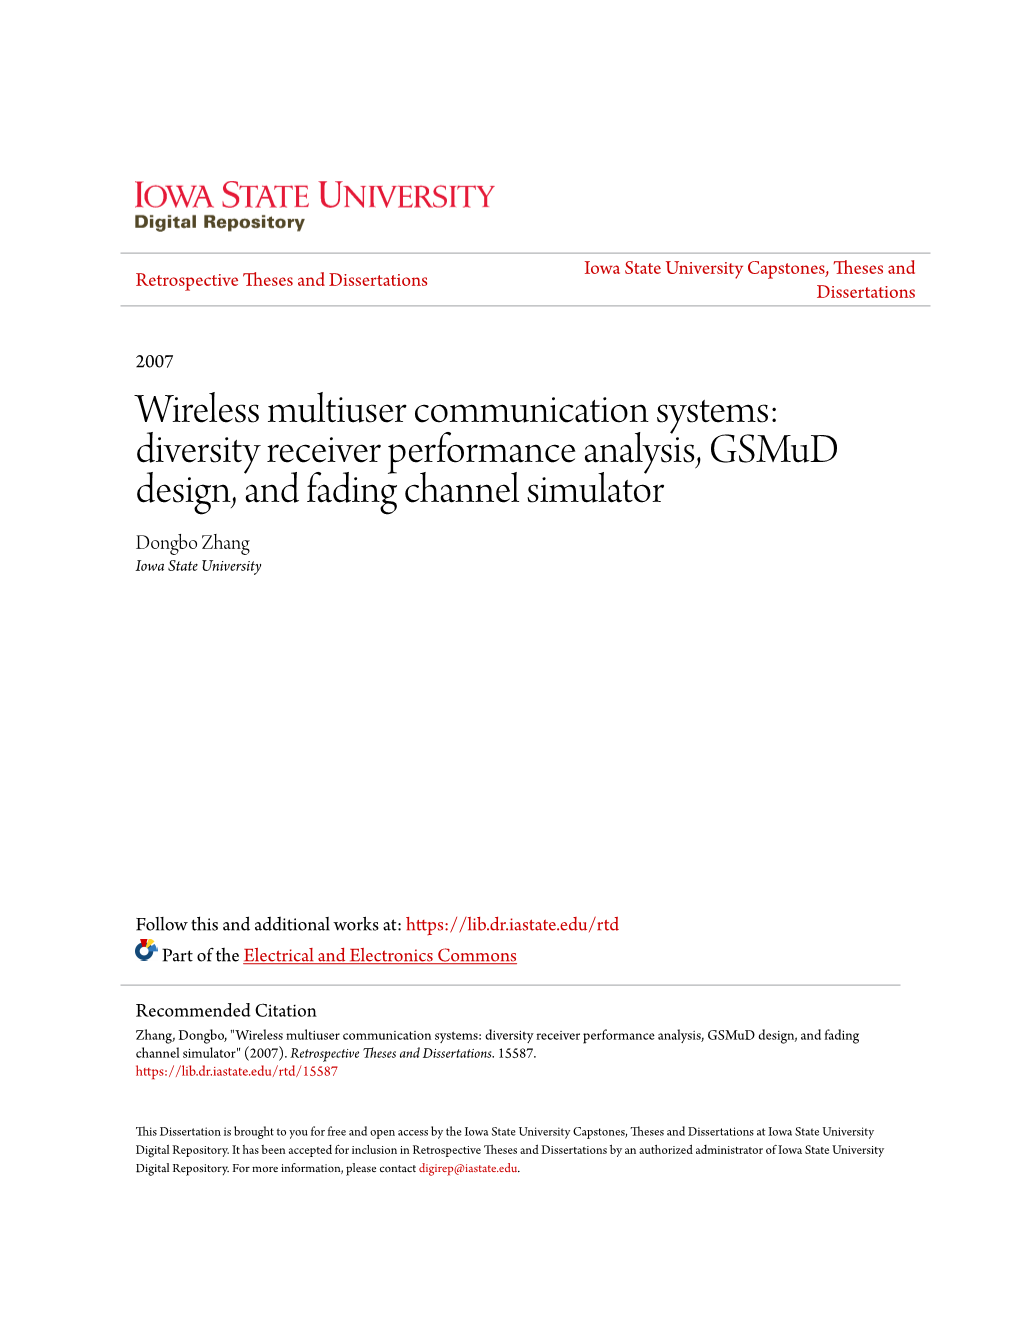 Wireless Multiuser Communication Systems: Diversity Receiver Performance Analysis, Gsmud Design, and Fading Channel Simulator Dongbo Zhang Iowa State University